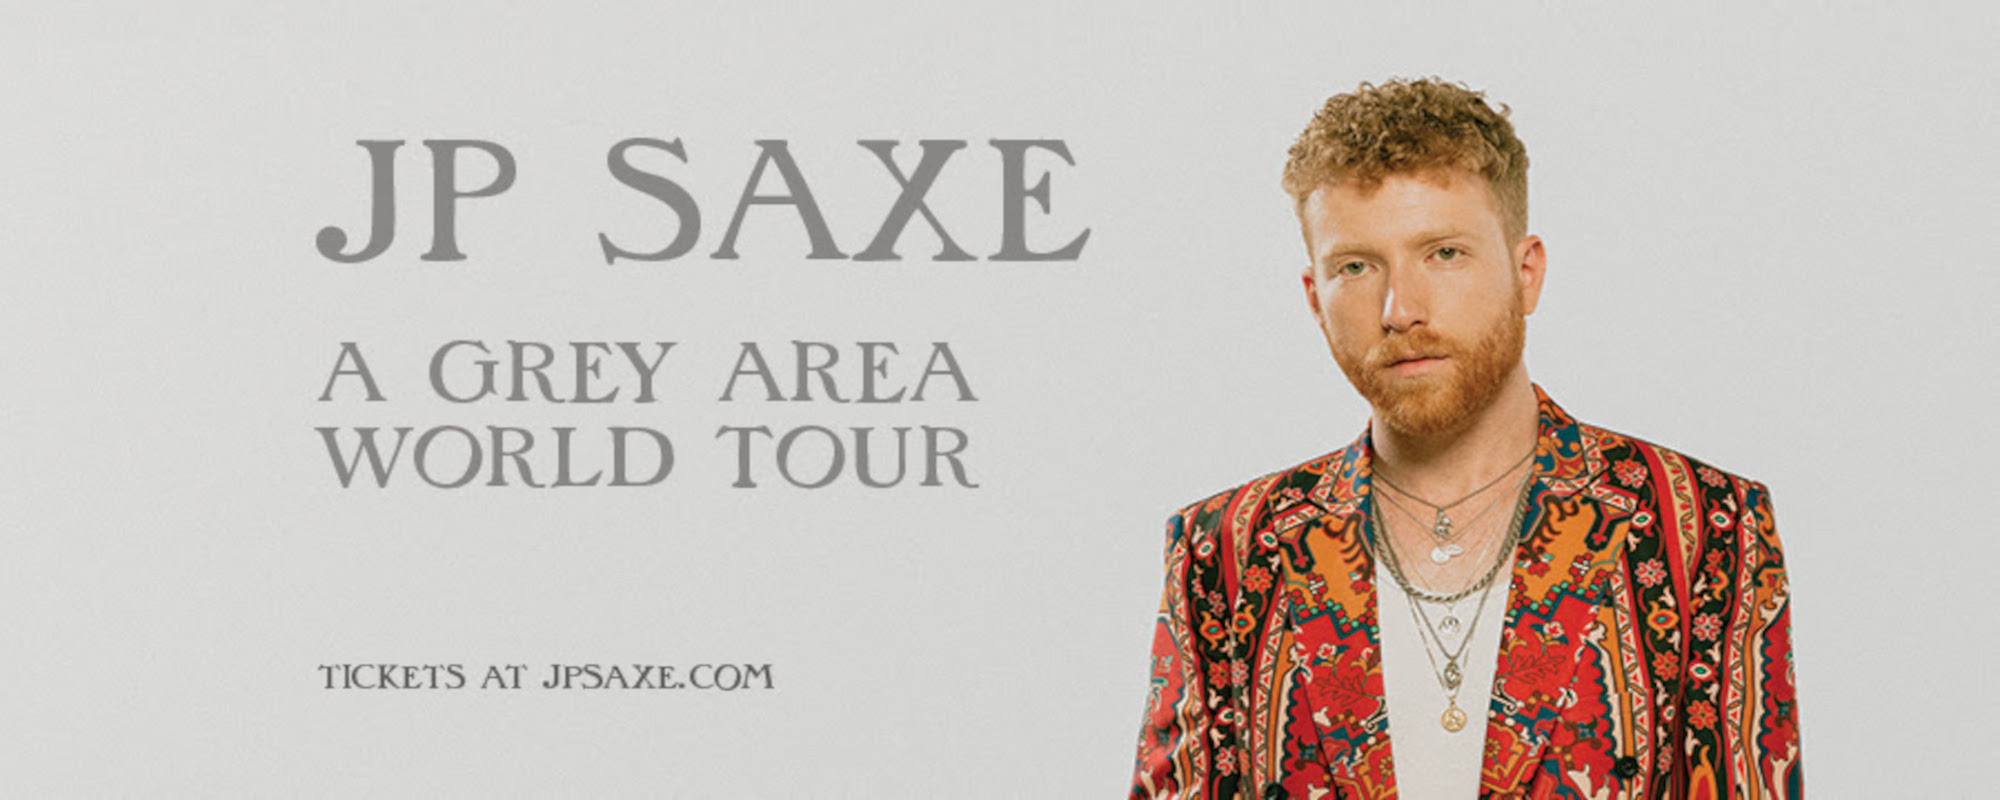 JP Saxe Announces A Grey Area World Tour in Support of Upcoming Album Release